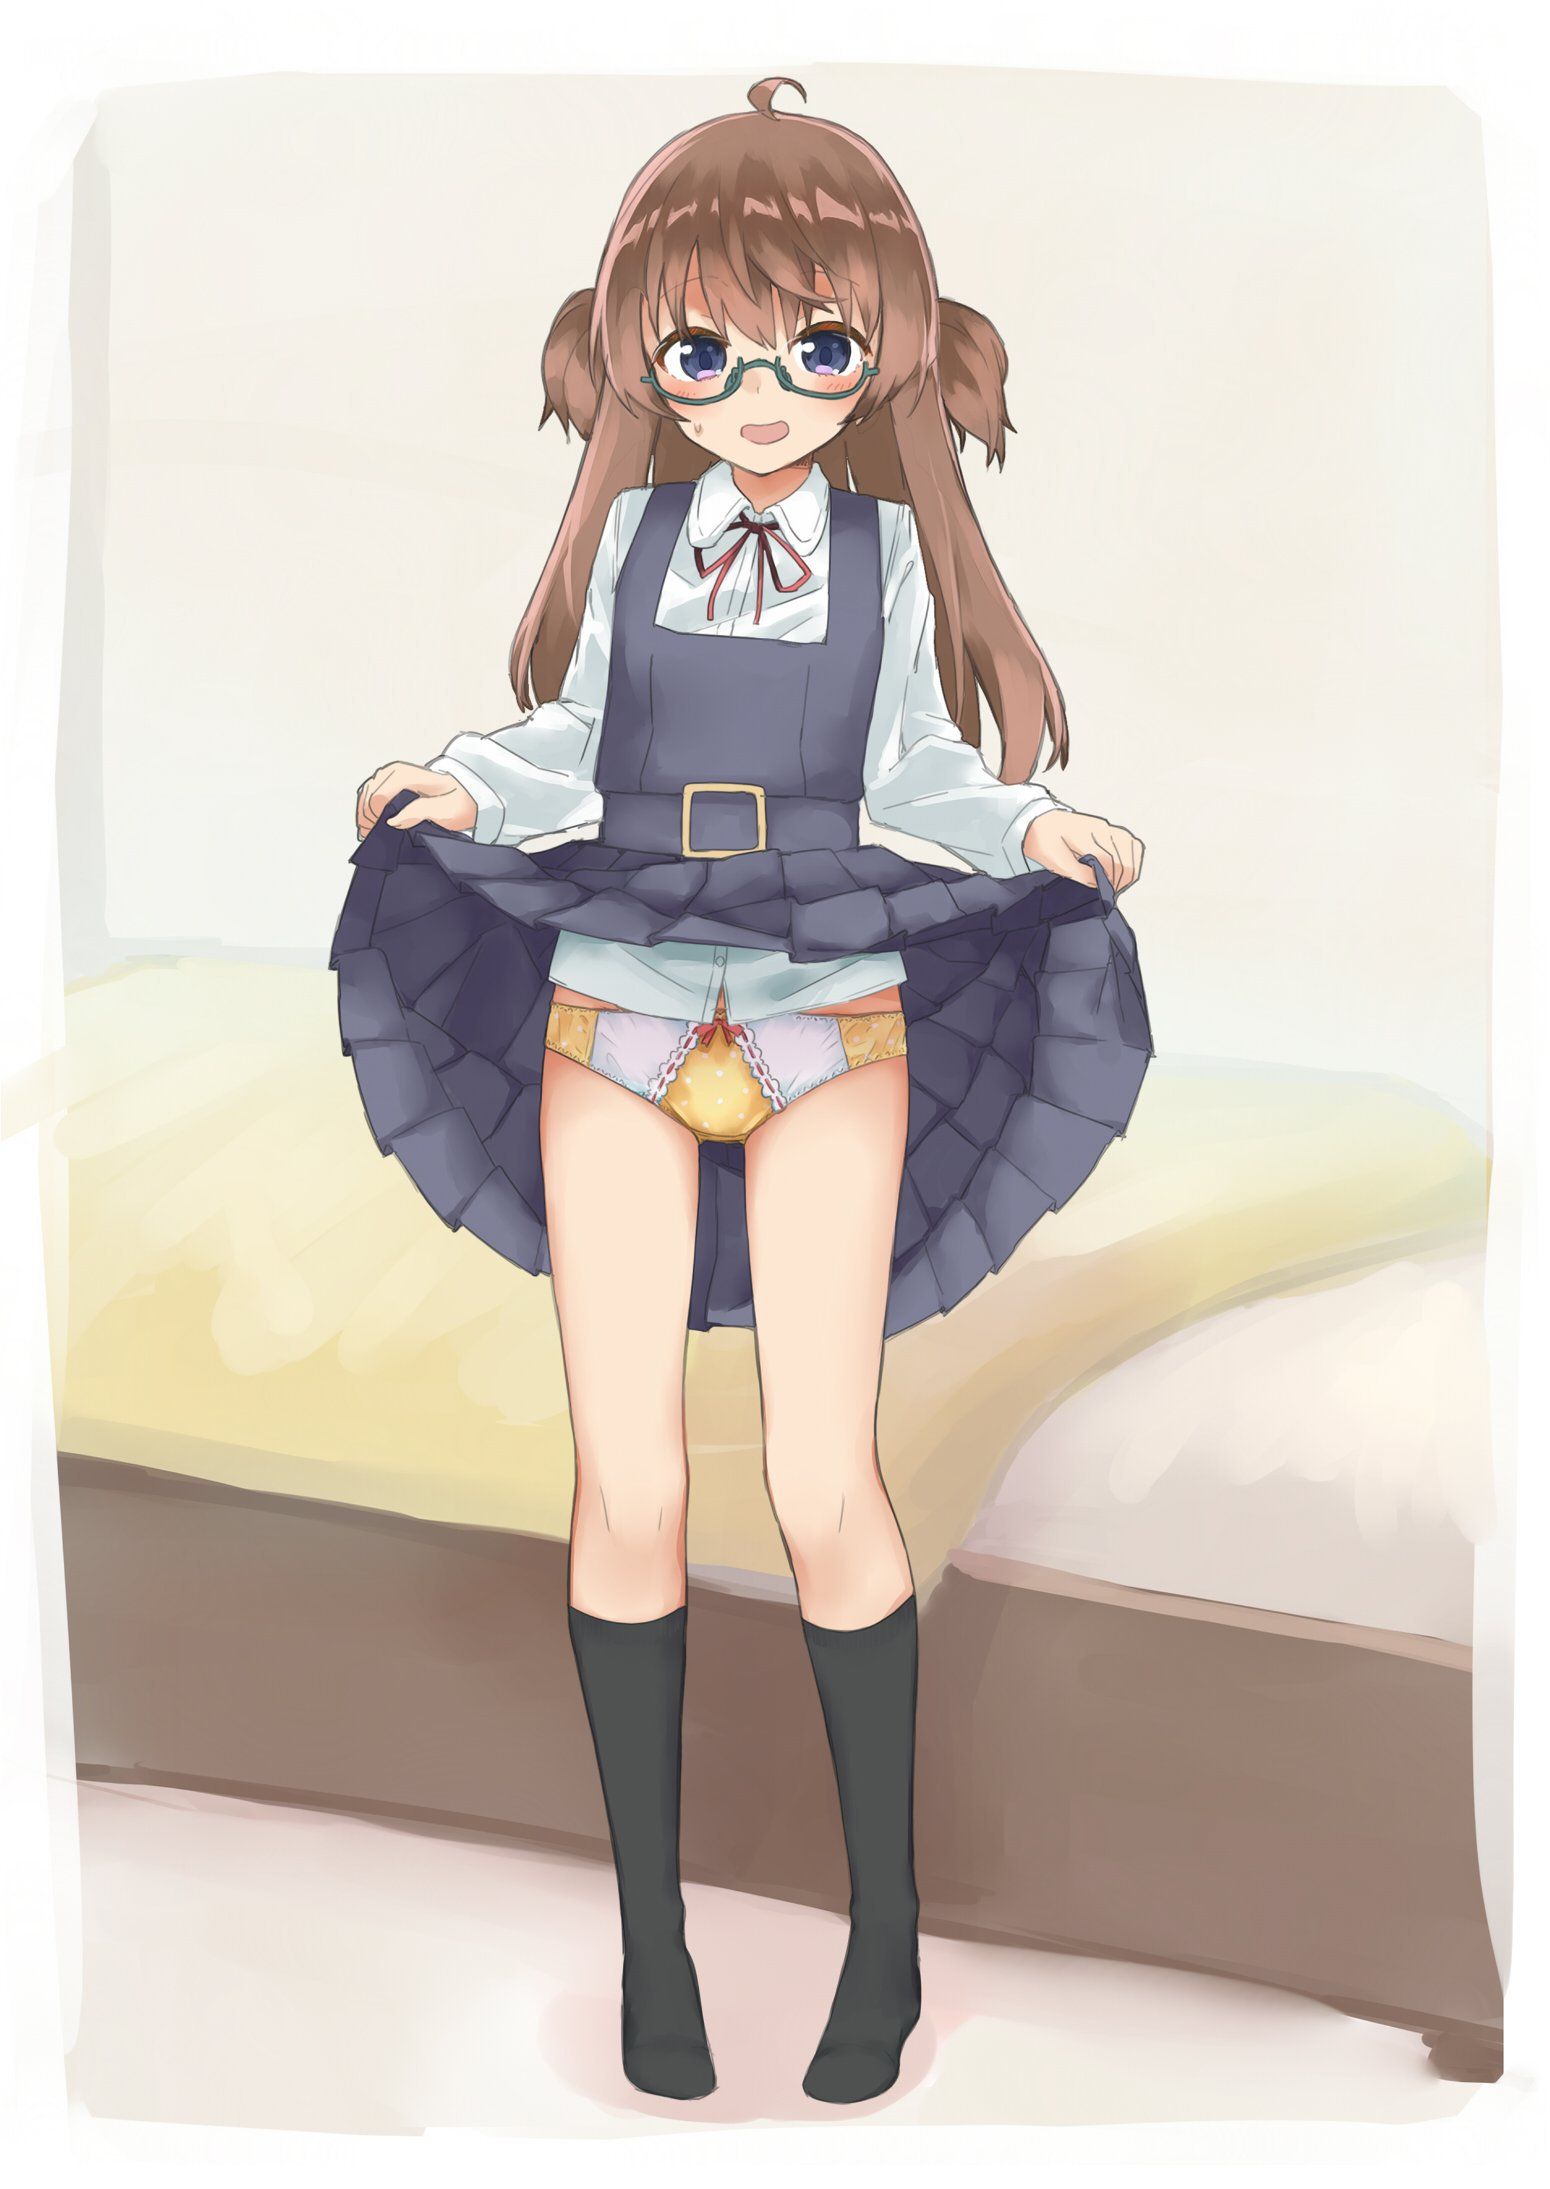 [Lori pants image] Loli pants secondary erotic image to become energetic on the weekend you want to spend looking at the cute pants of the secondary Loli girl 21